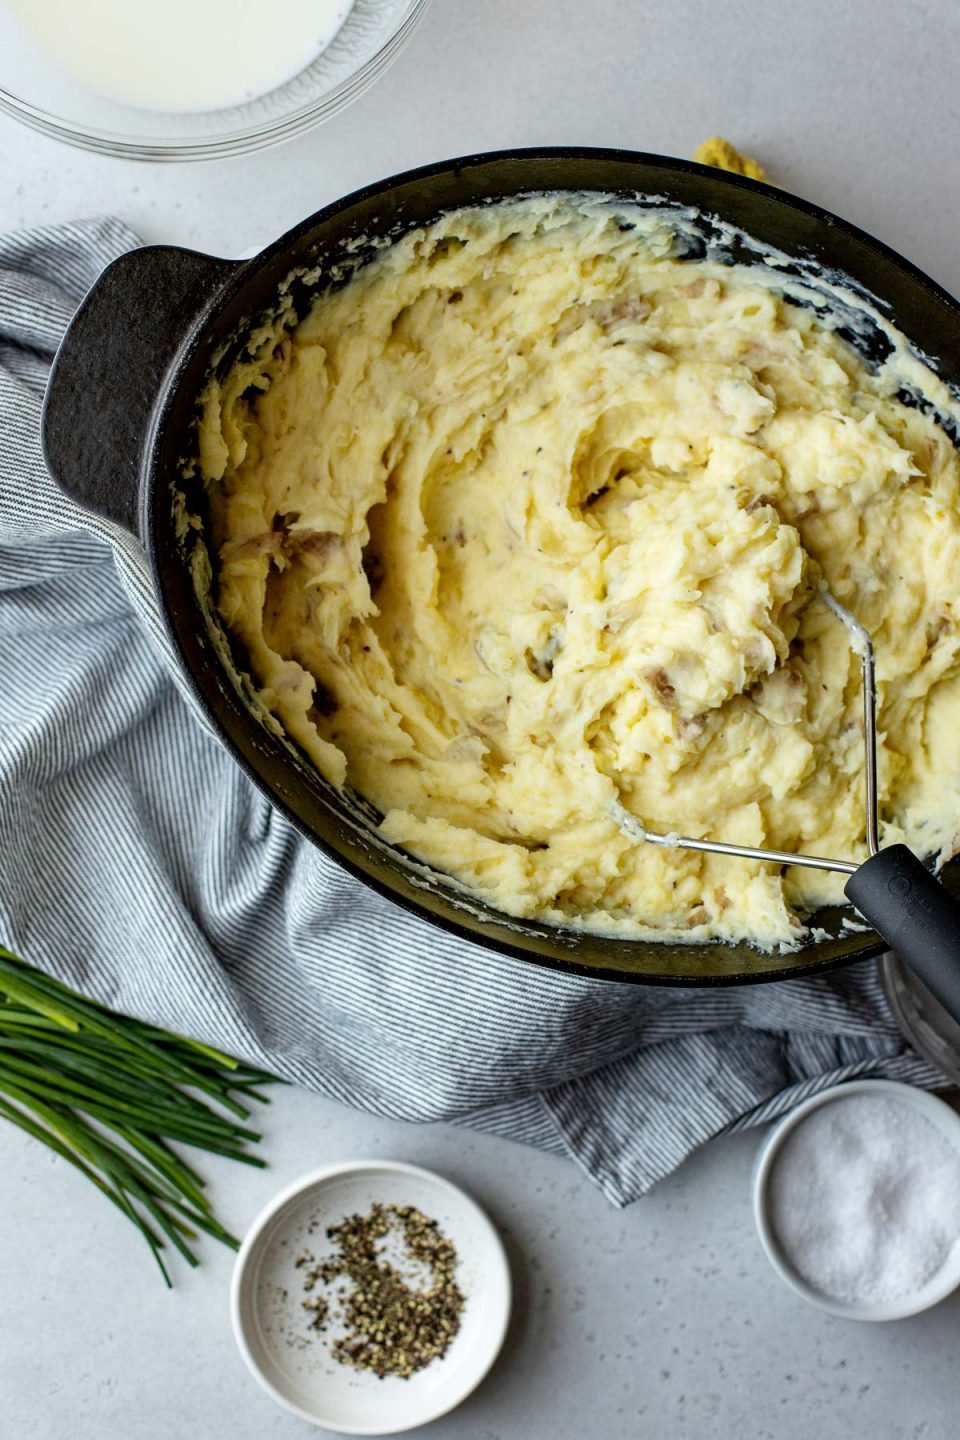 An overhead shot of a dutch oven filled with Roasted Garlic Buttermilk Mashed Potatoes. The dutch oven sits atop a creamy white textured surface. A potato masher rests inside the dutch oven. A blue and white striped linen napkin, a pile of chive scapes, two white pinch bowls filled with ground black pepper and kosher salt, and a clear glass bowl filled with buttermilk ​also rest on the surface & surround the serving bowl.